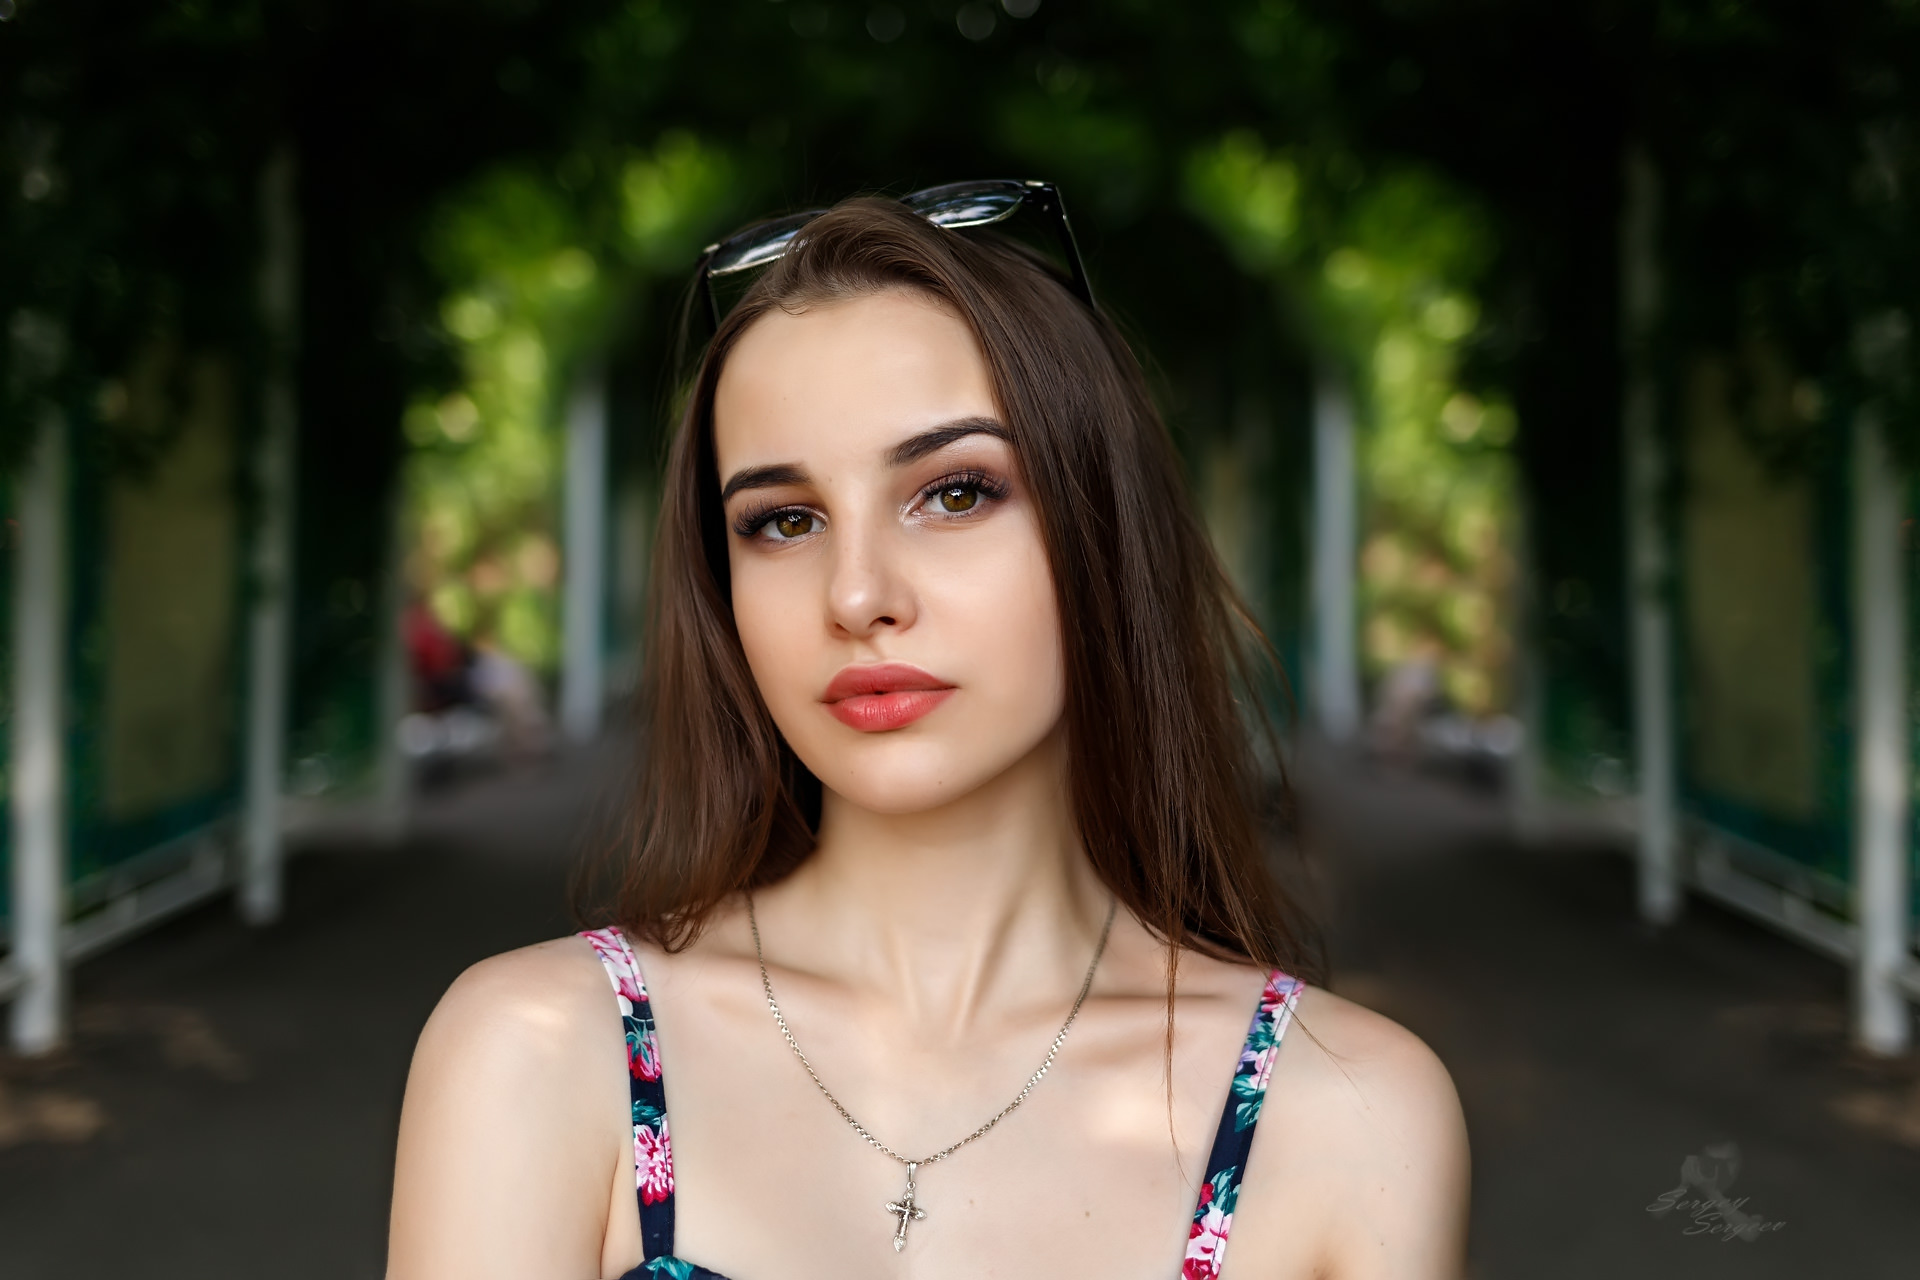 People 1920x1280 women face portrait necklace sunglasses red lipstick bare shoulders women outdoors women with glasses